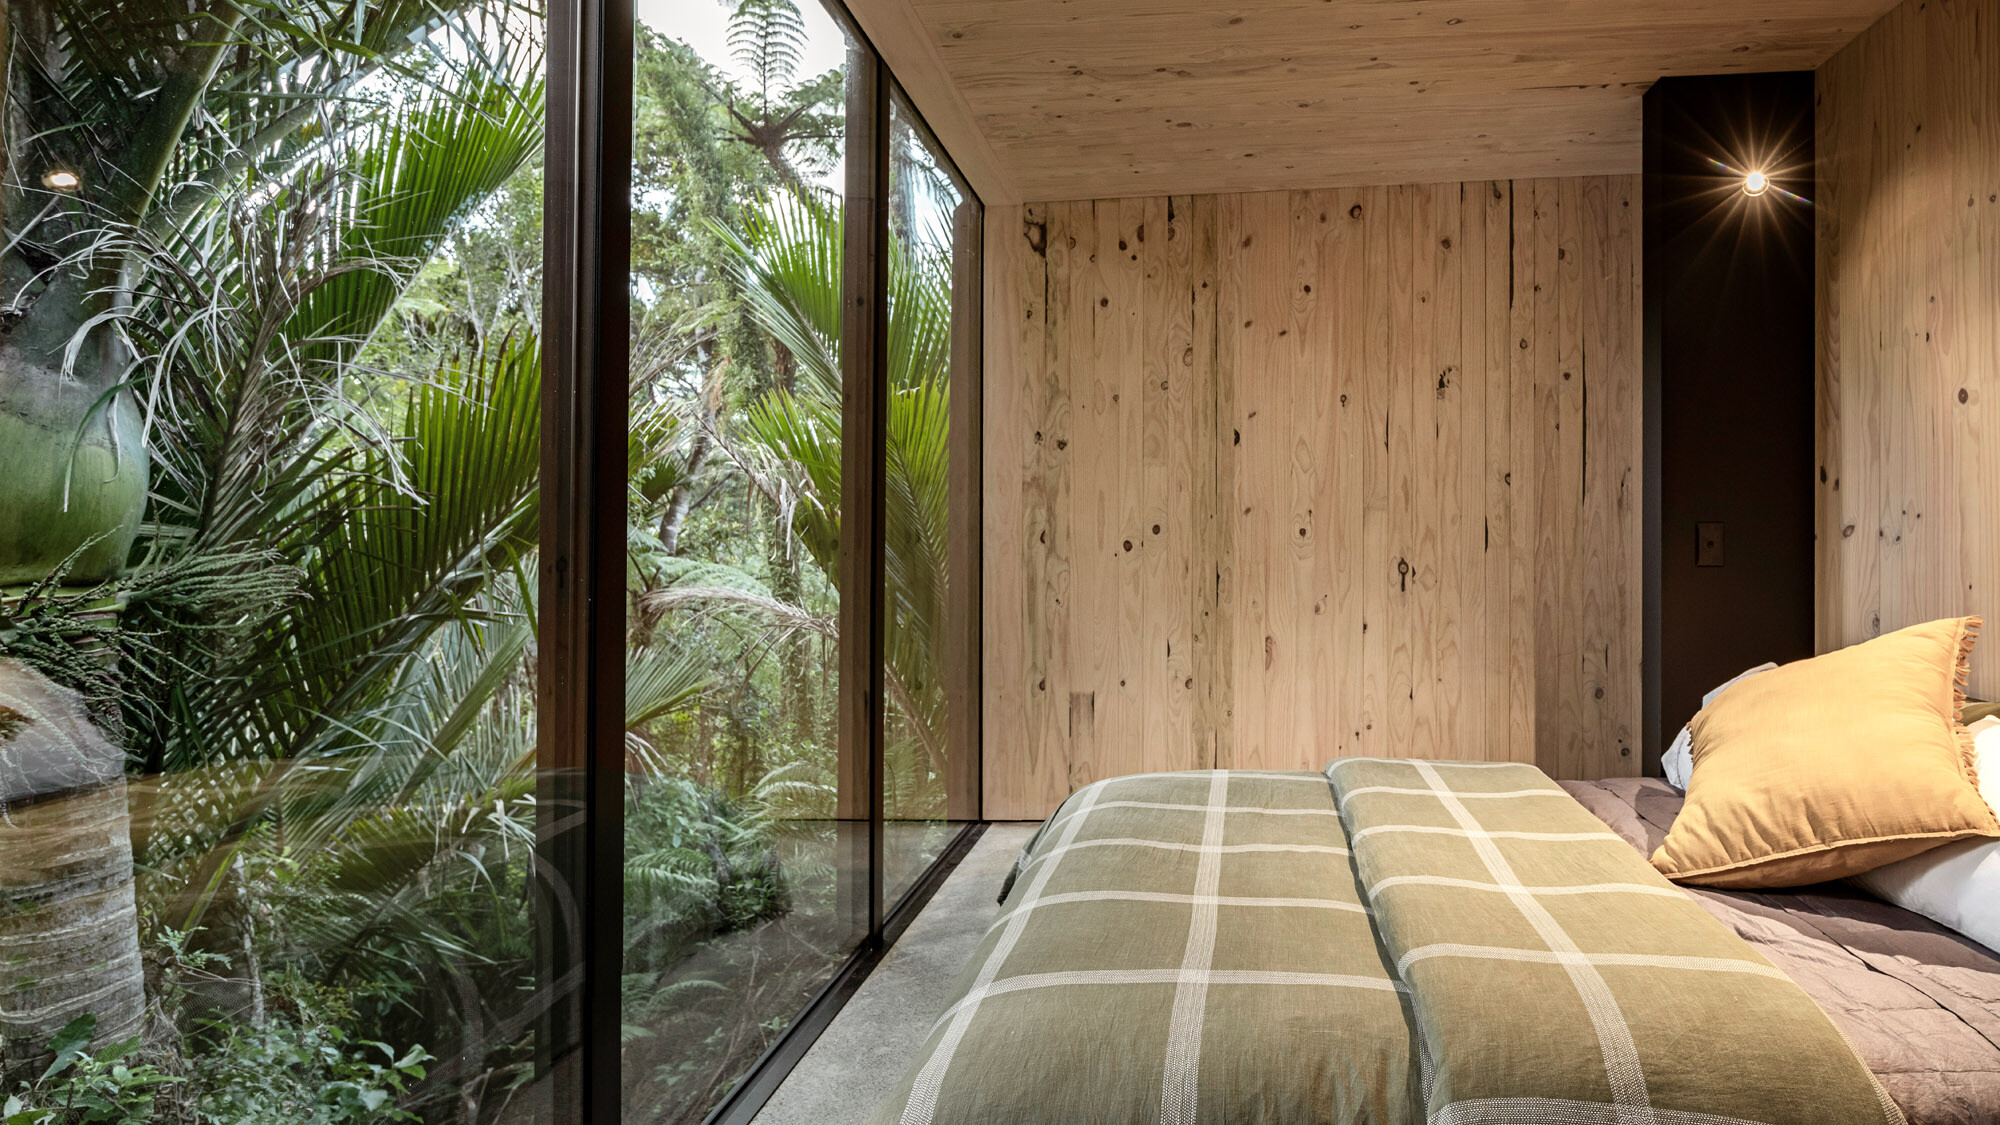 The bedroom with the floor-to-ceiling window, the bush borders directly behind it.